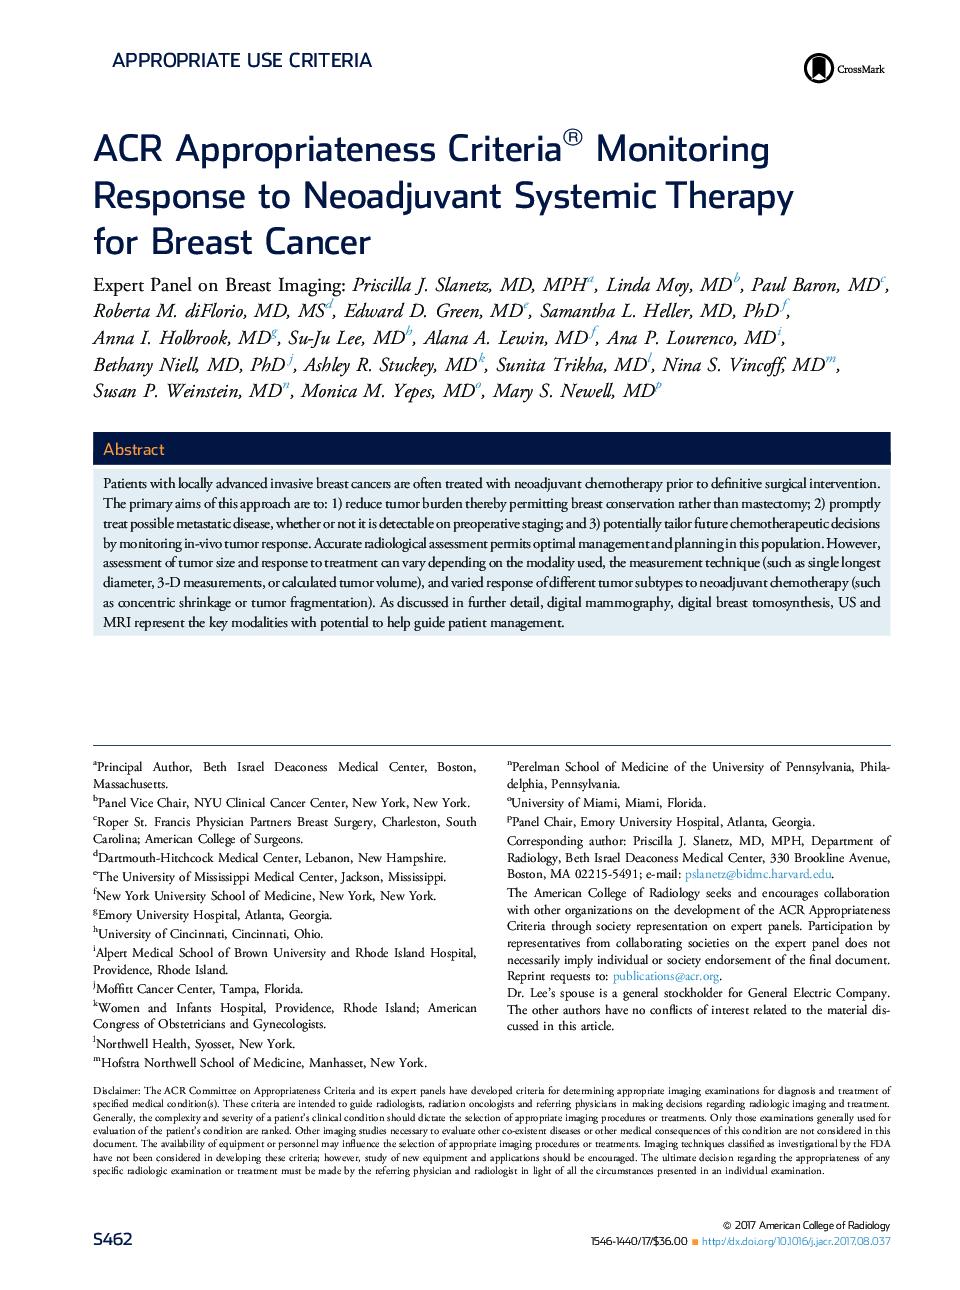 ACR Appropriateness Criteria® Monitoring Response to Neoadjuvant Systemic Therapy forÂ Breast Cancer